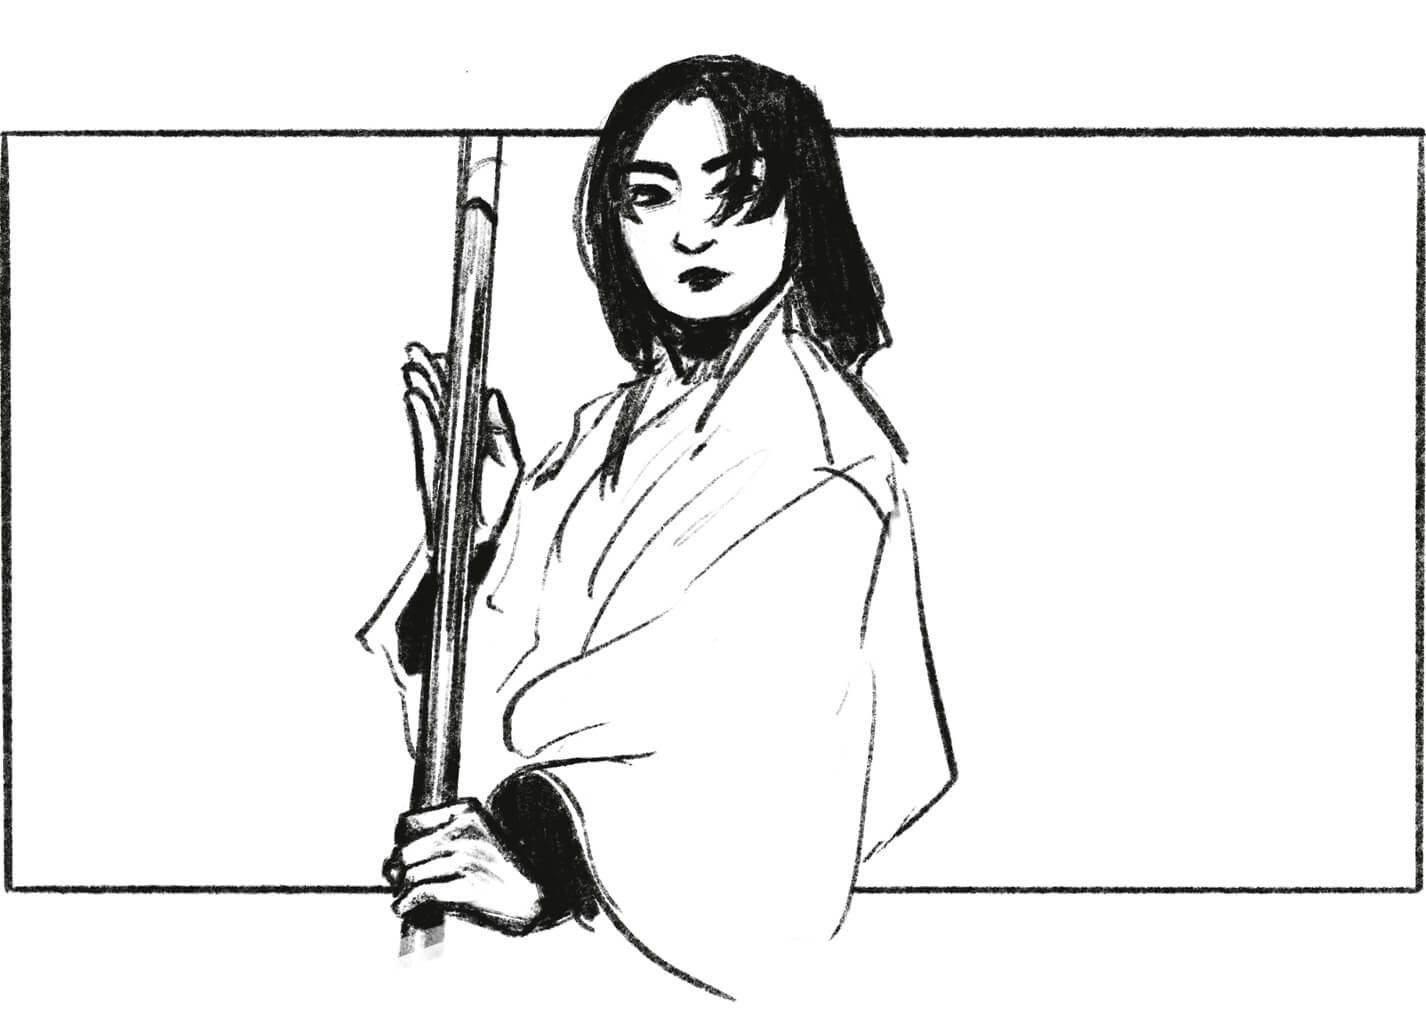 Sketch of Mariko from Shogun, wielding a polearm, referenced from episode 9.